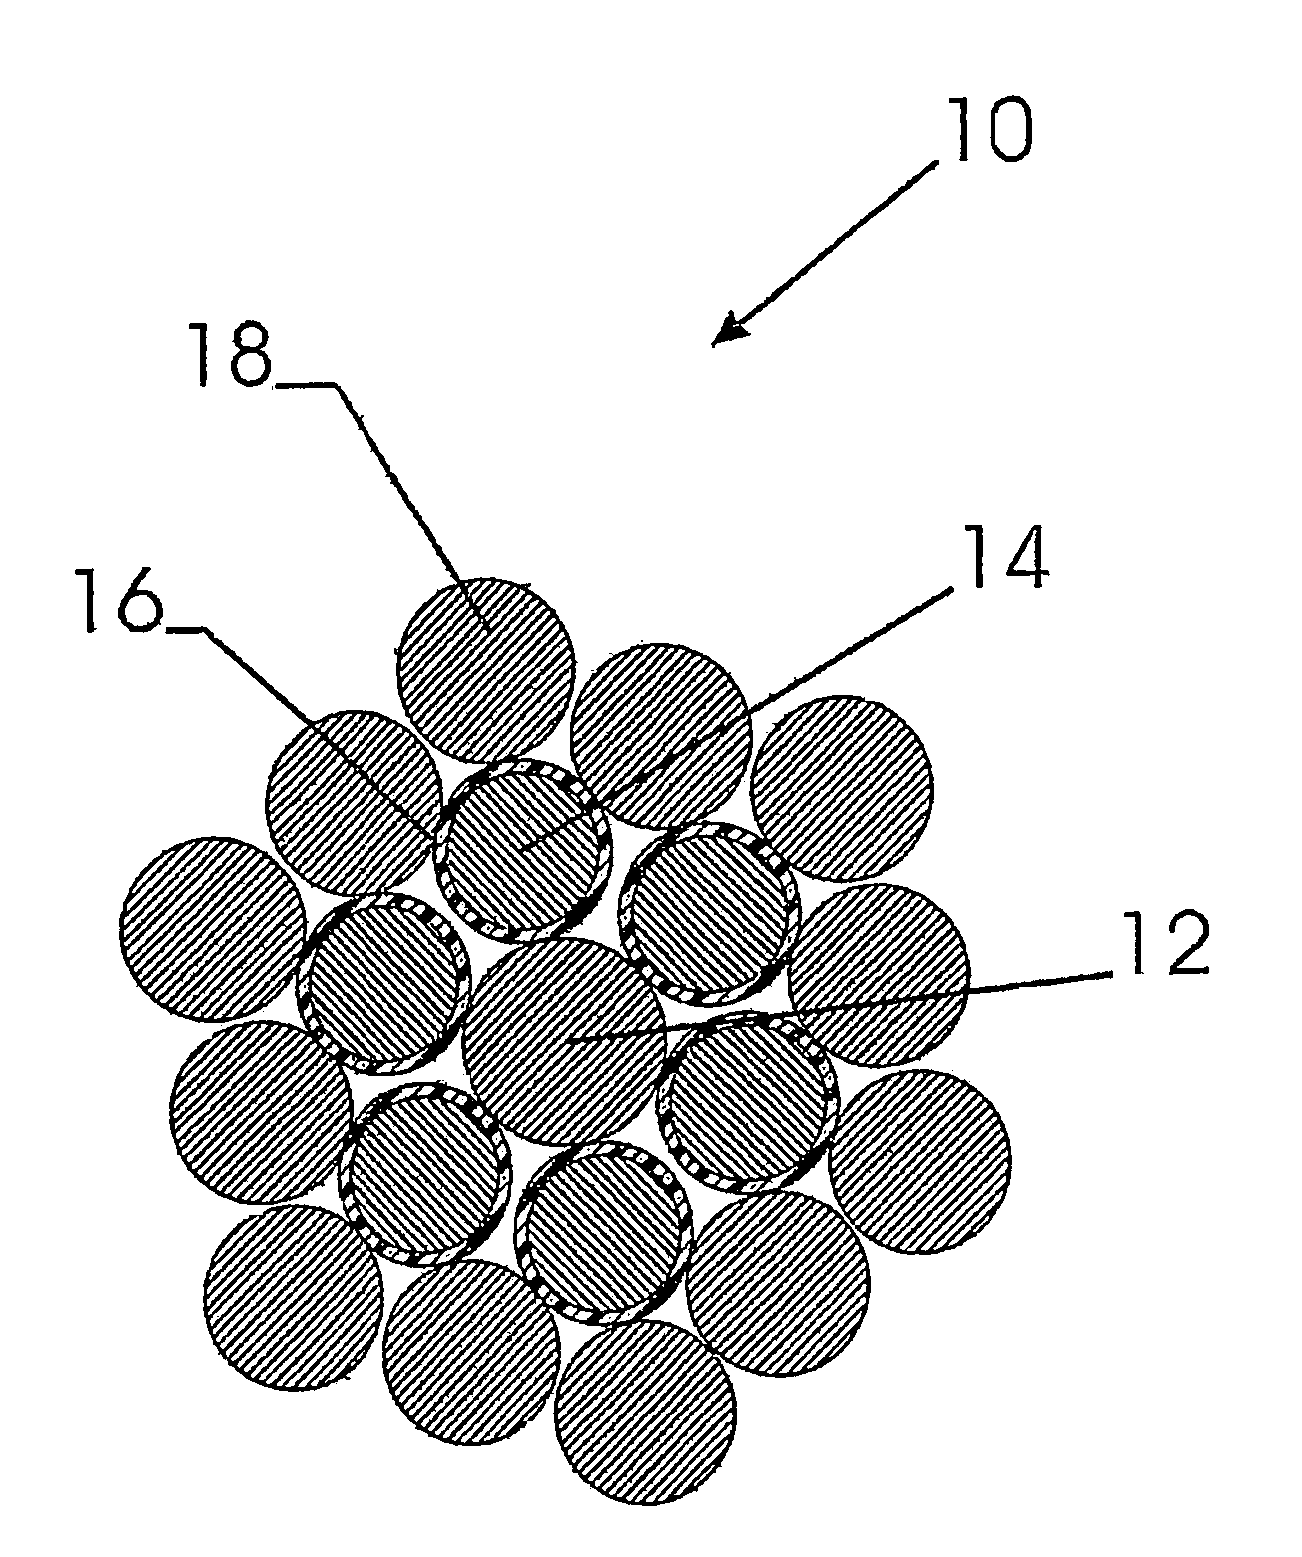 Multi-layer steel cord where intermediate filaments are coated with a polymer